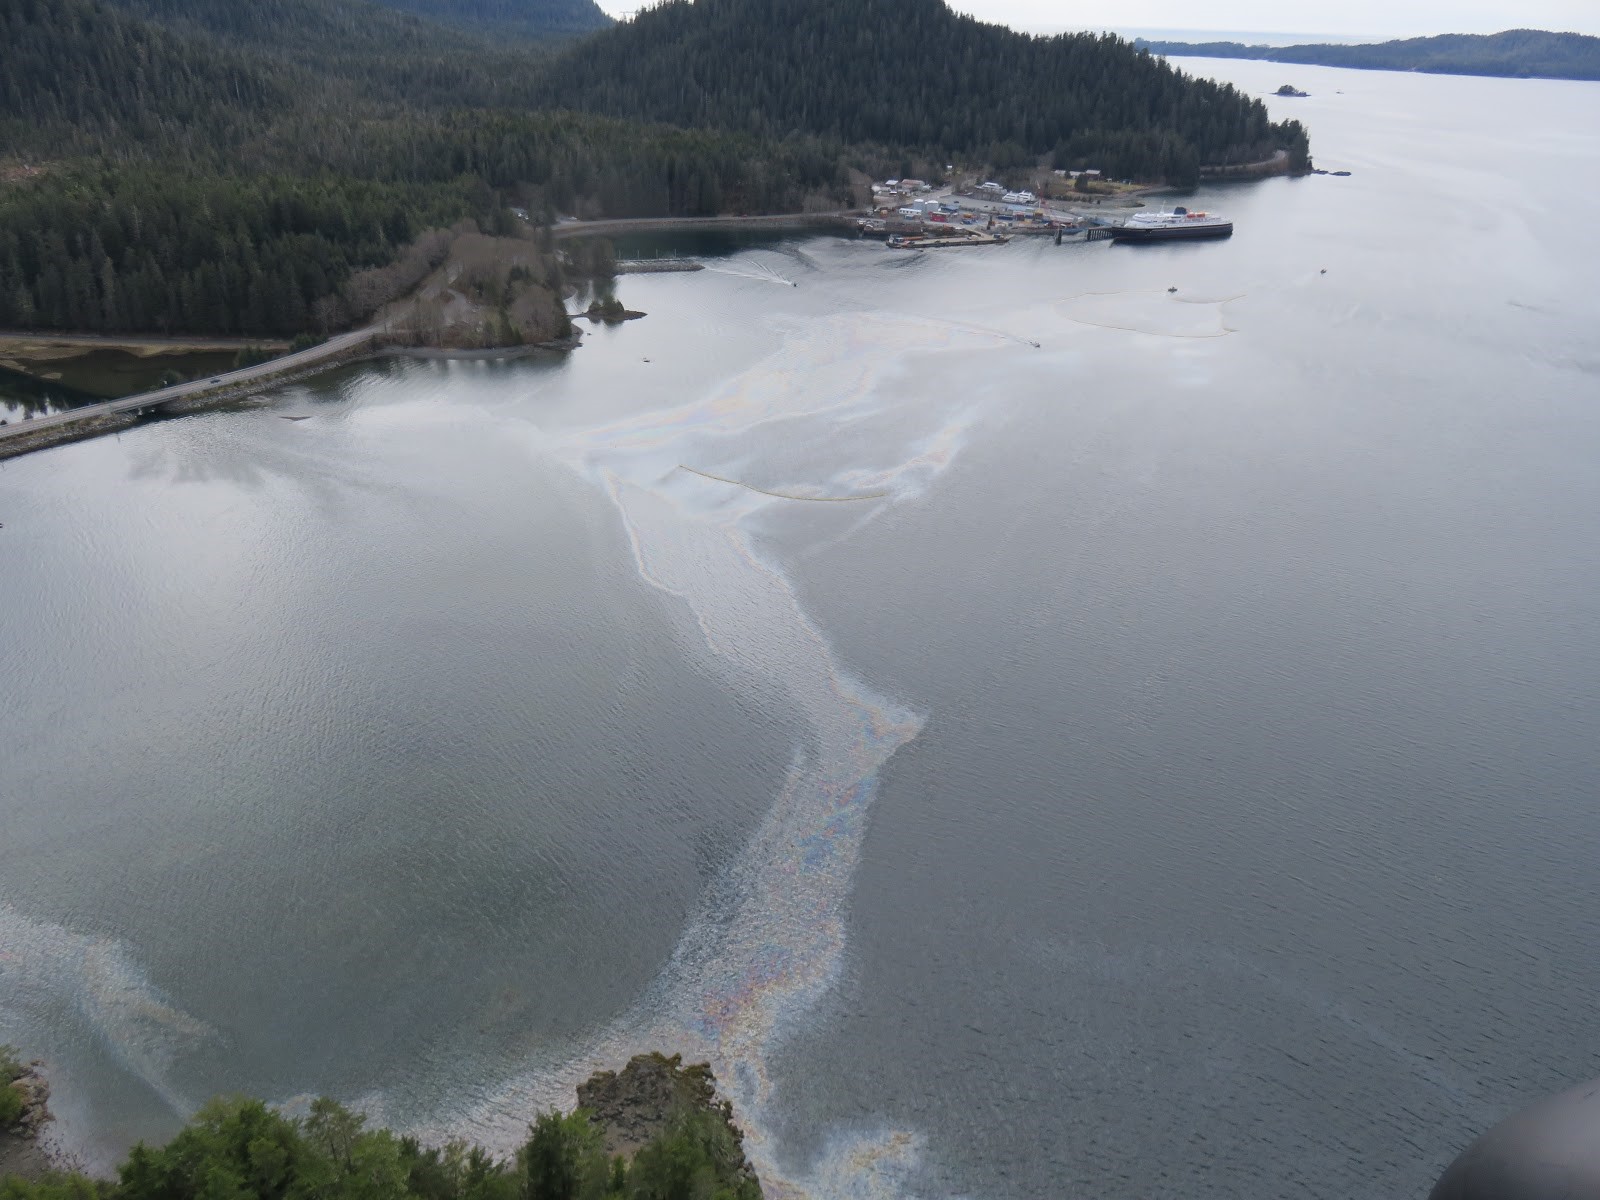 Oil sheen, containment boom, and deflection boom in Starrigavan Bay on April 23, 2017. Image credit: U.S. Coast Guard.